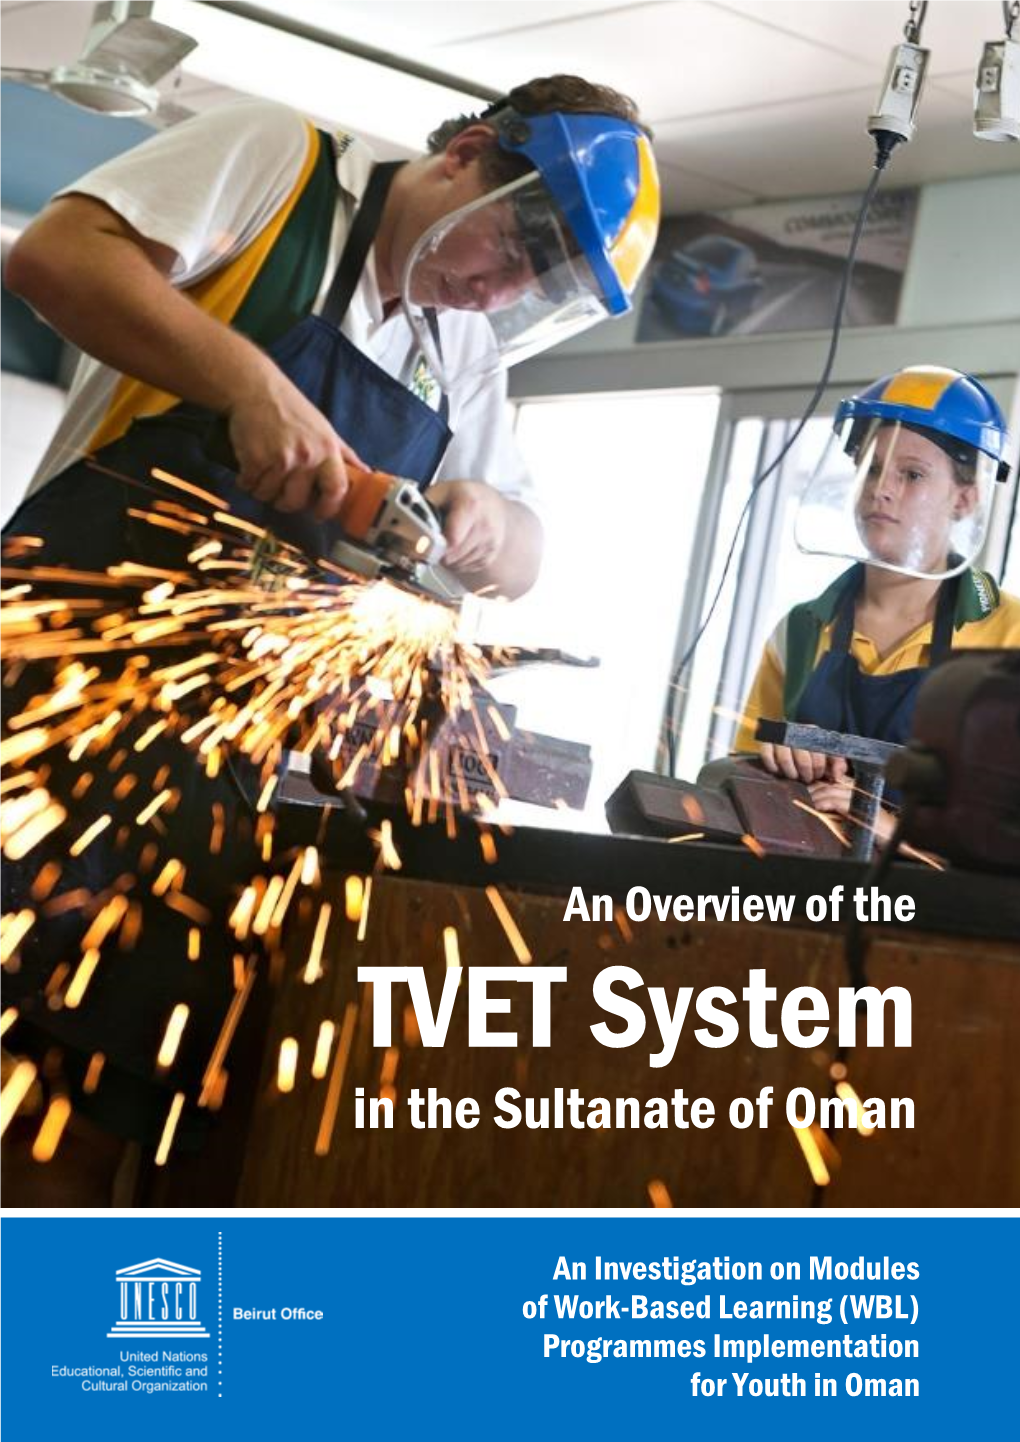 An Overview at the TVET System in the Sultanate of Oman